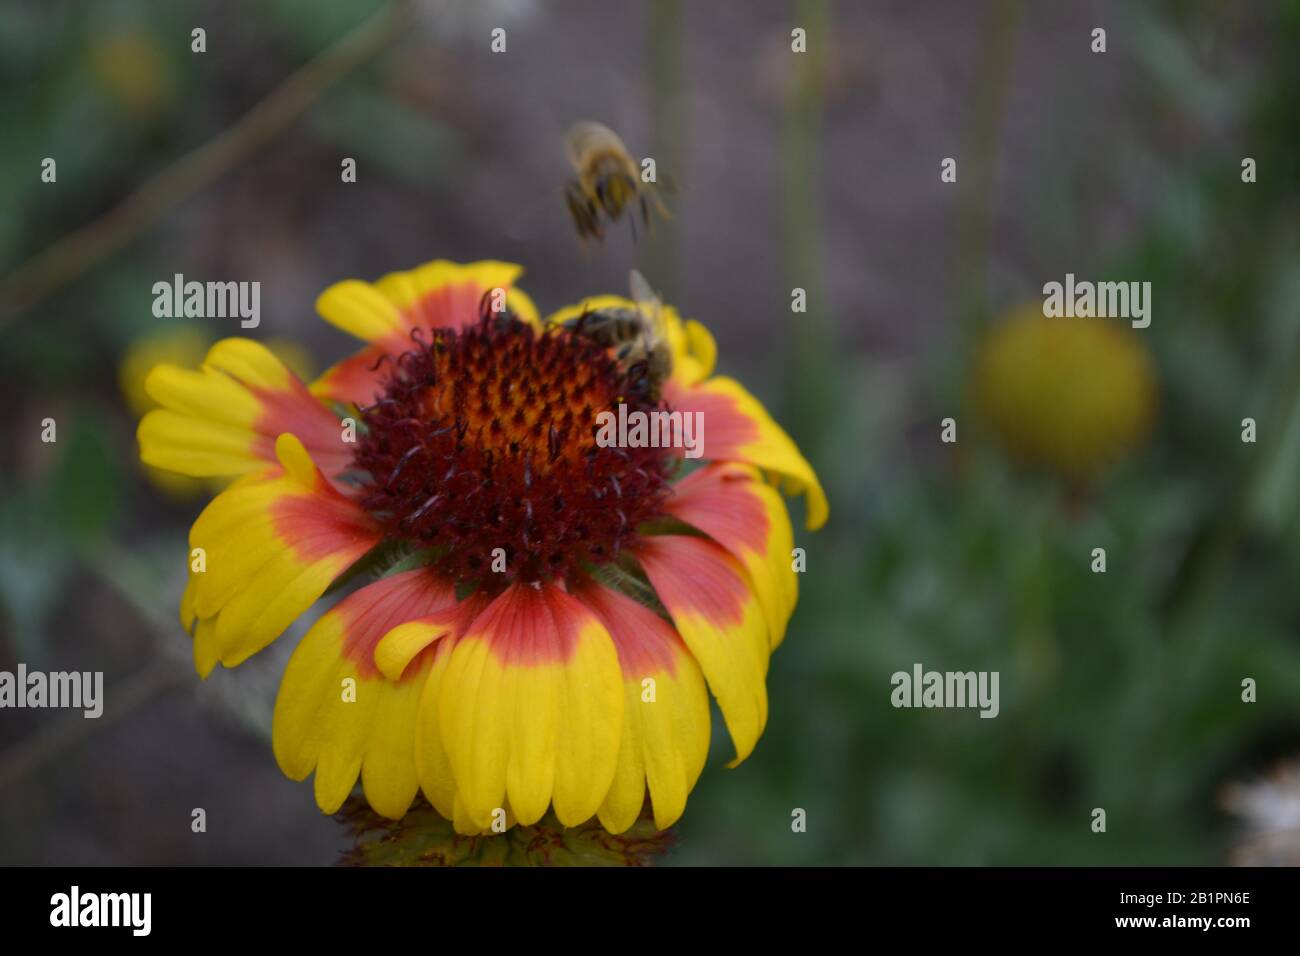 Gaillardia. G. hybrida Fanfare. A bee on a flower. Summer days. Flowerbed with flowers. Green leaves. Bright yellow flowers. Horizontal Stock Photo